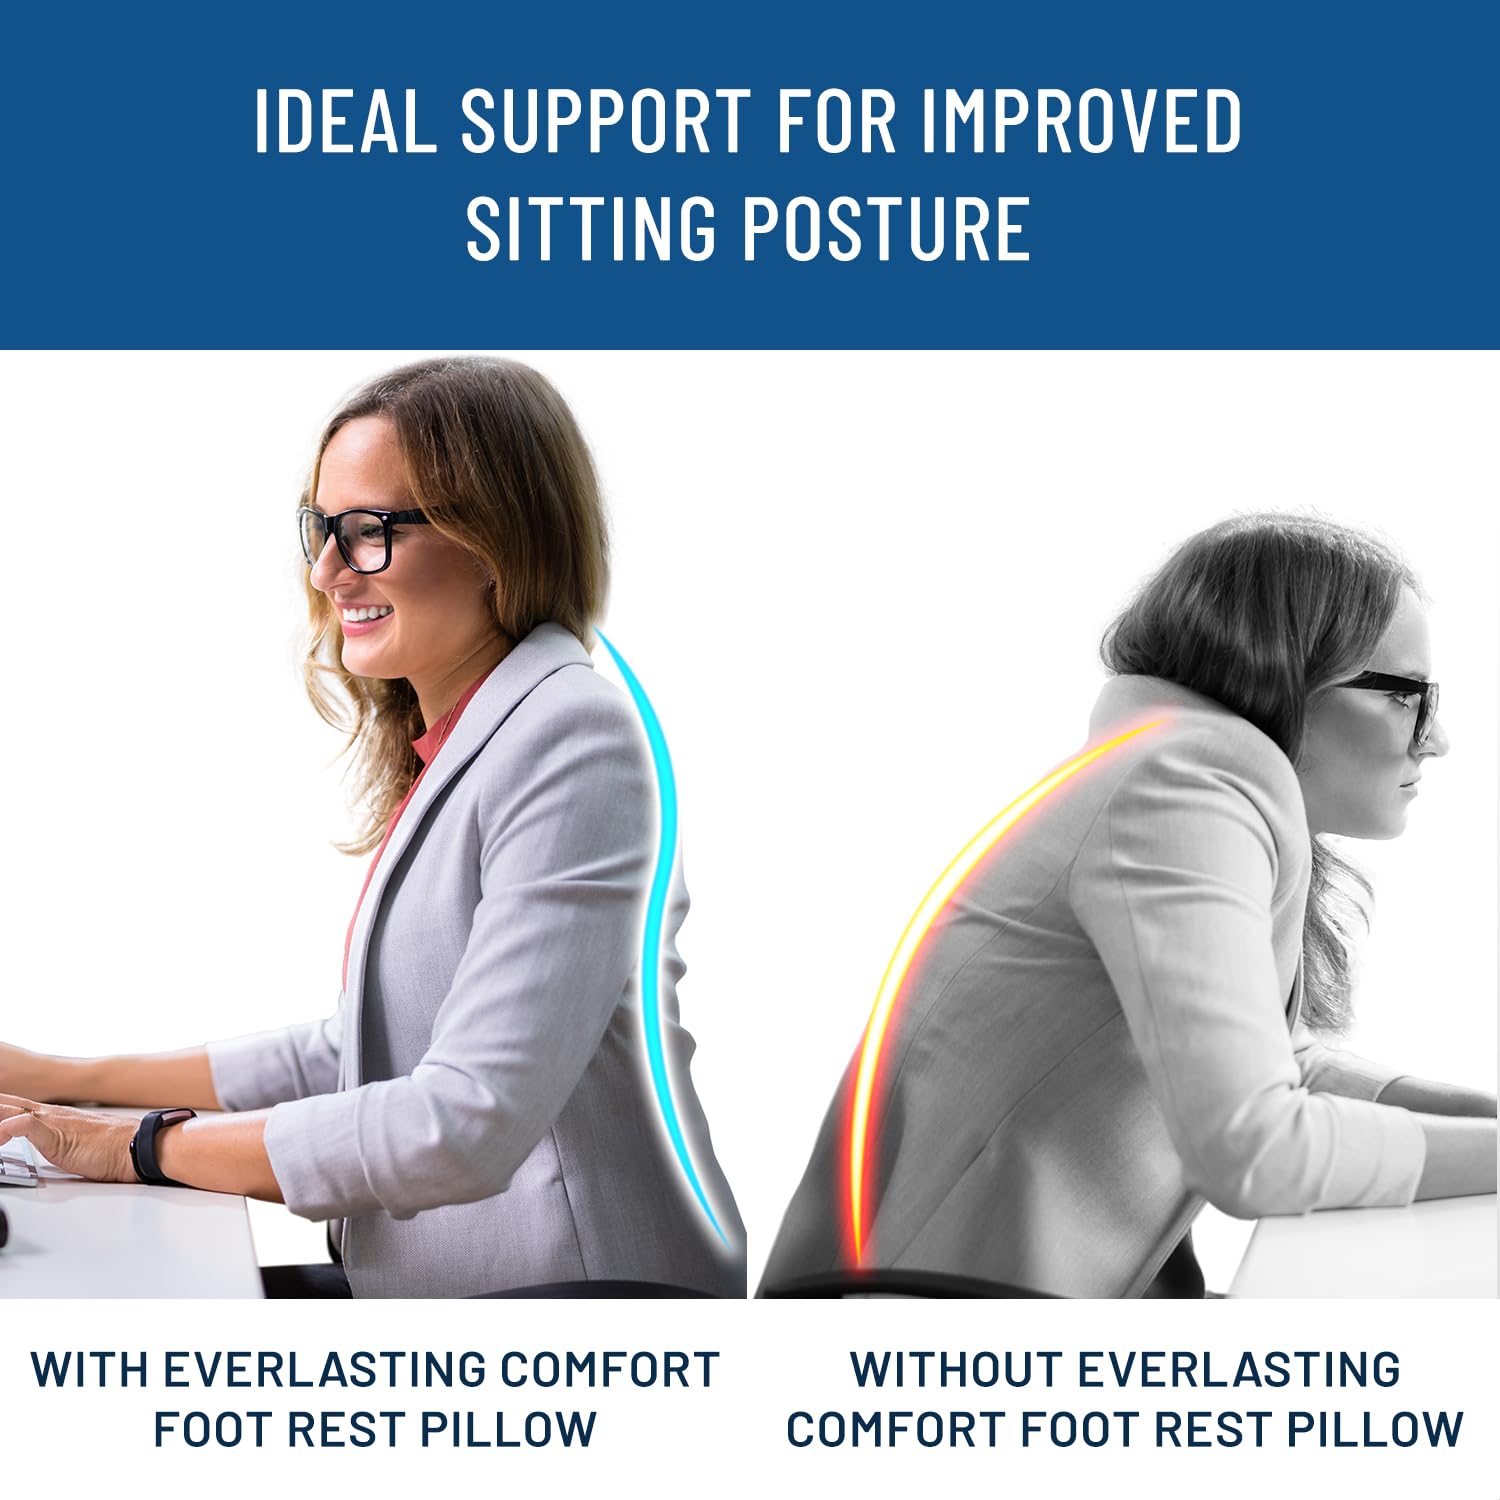 The Original Everlasting Comfort Foot Rest Under Desk for Office Use, All-Day Pain Relief and Leg Support Stool, Under Desk Foot Rest Ergonomic for Home Office, Work, Gaming Accessories